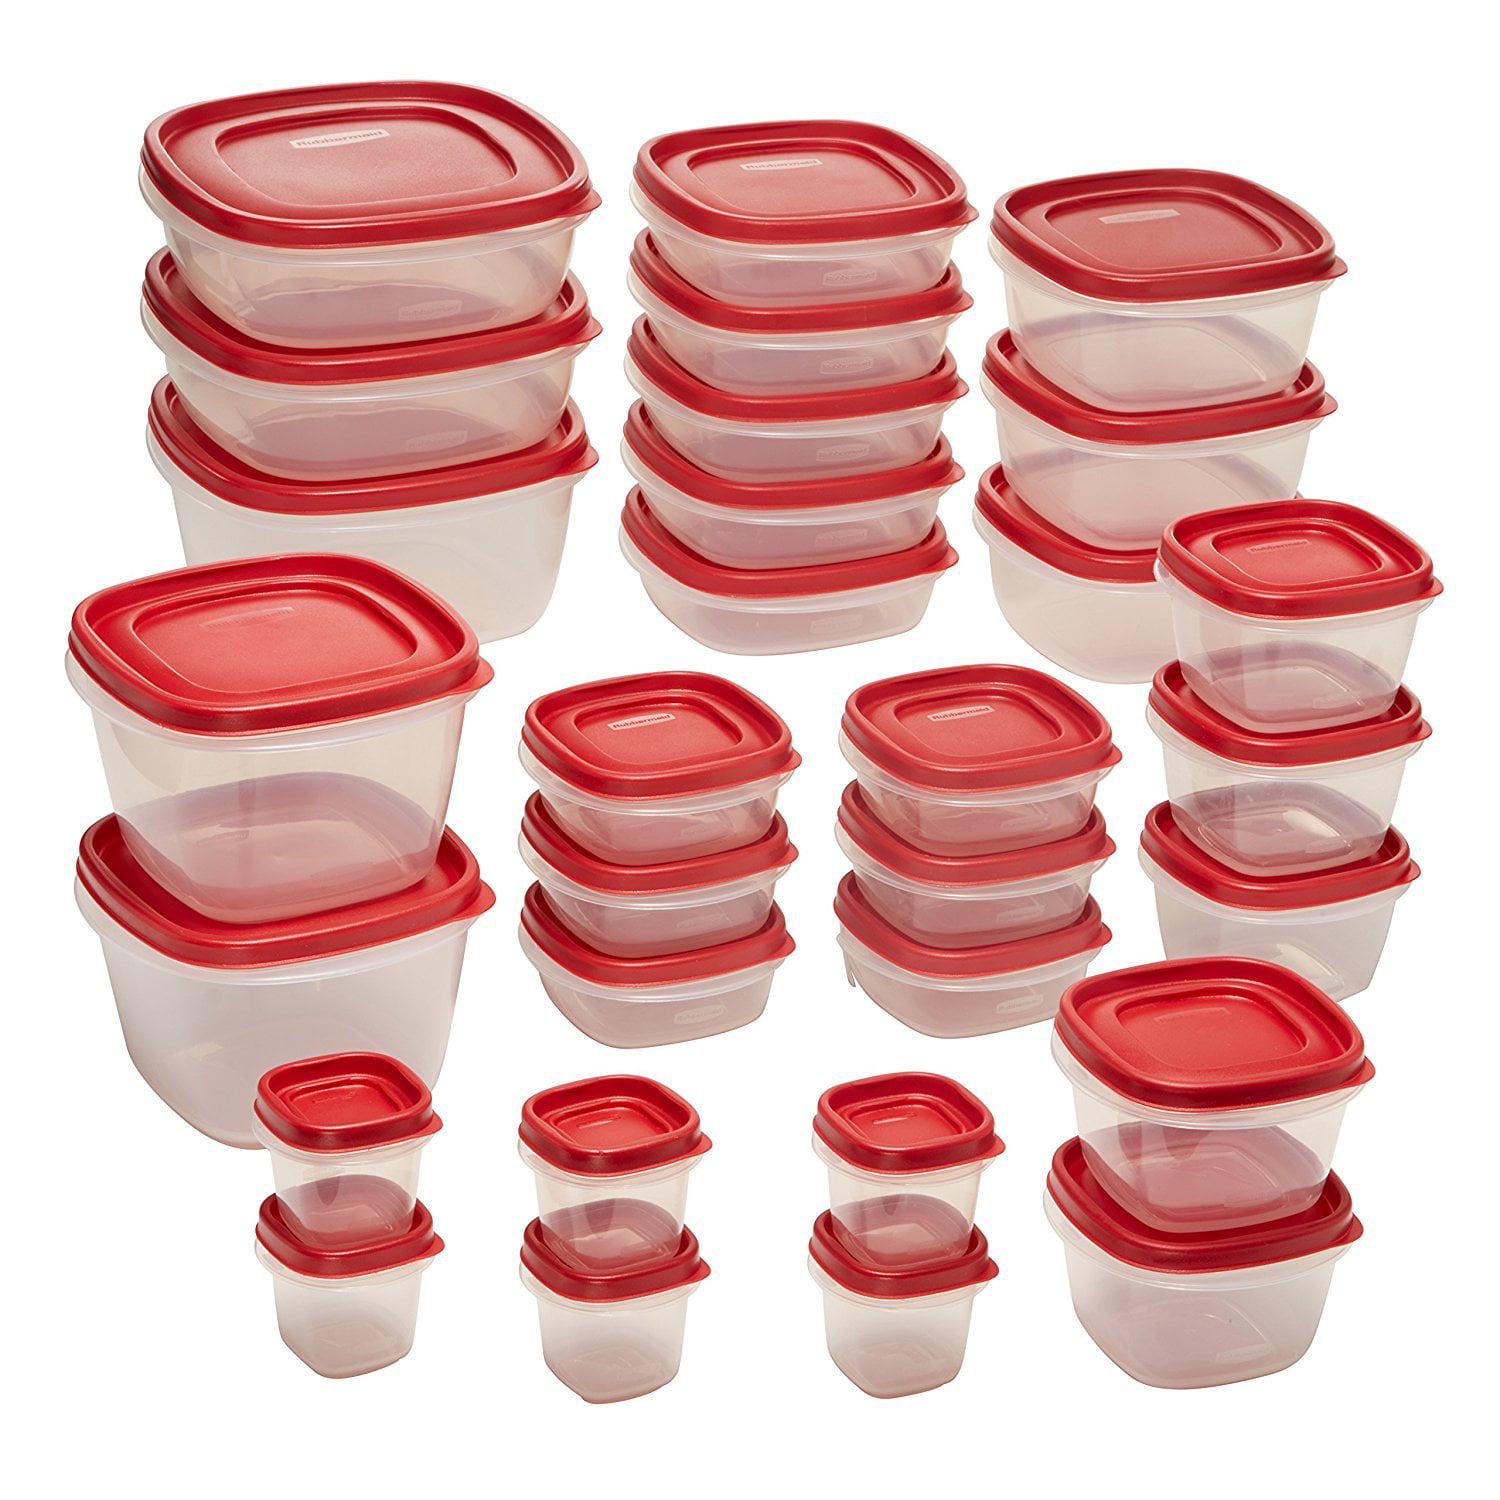 Rubbermaid Modular Food Storage Canister 5C, Red 